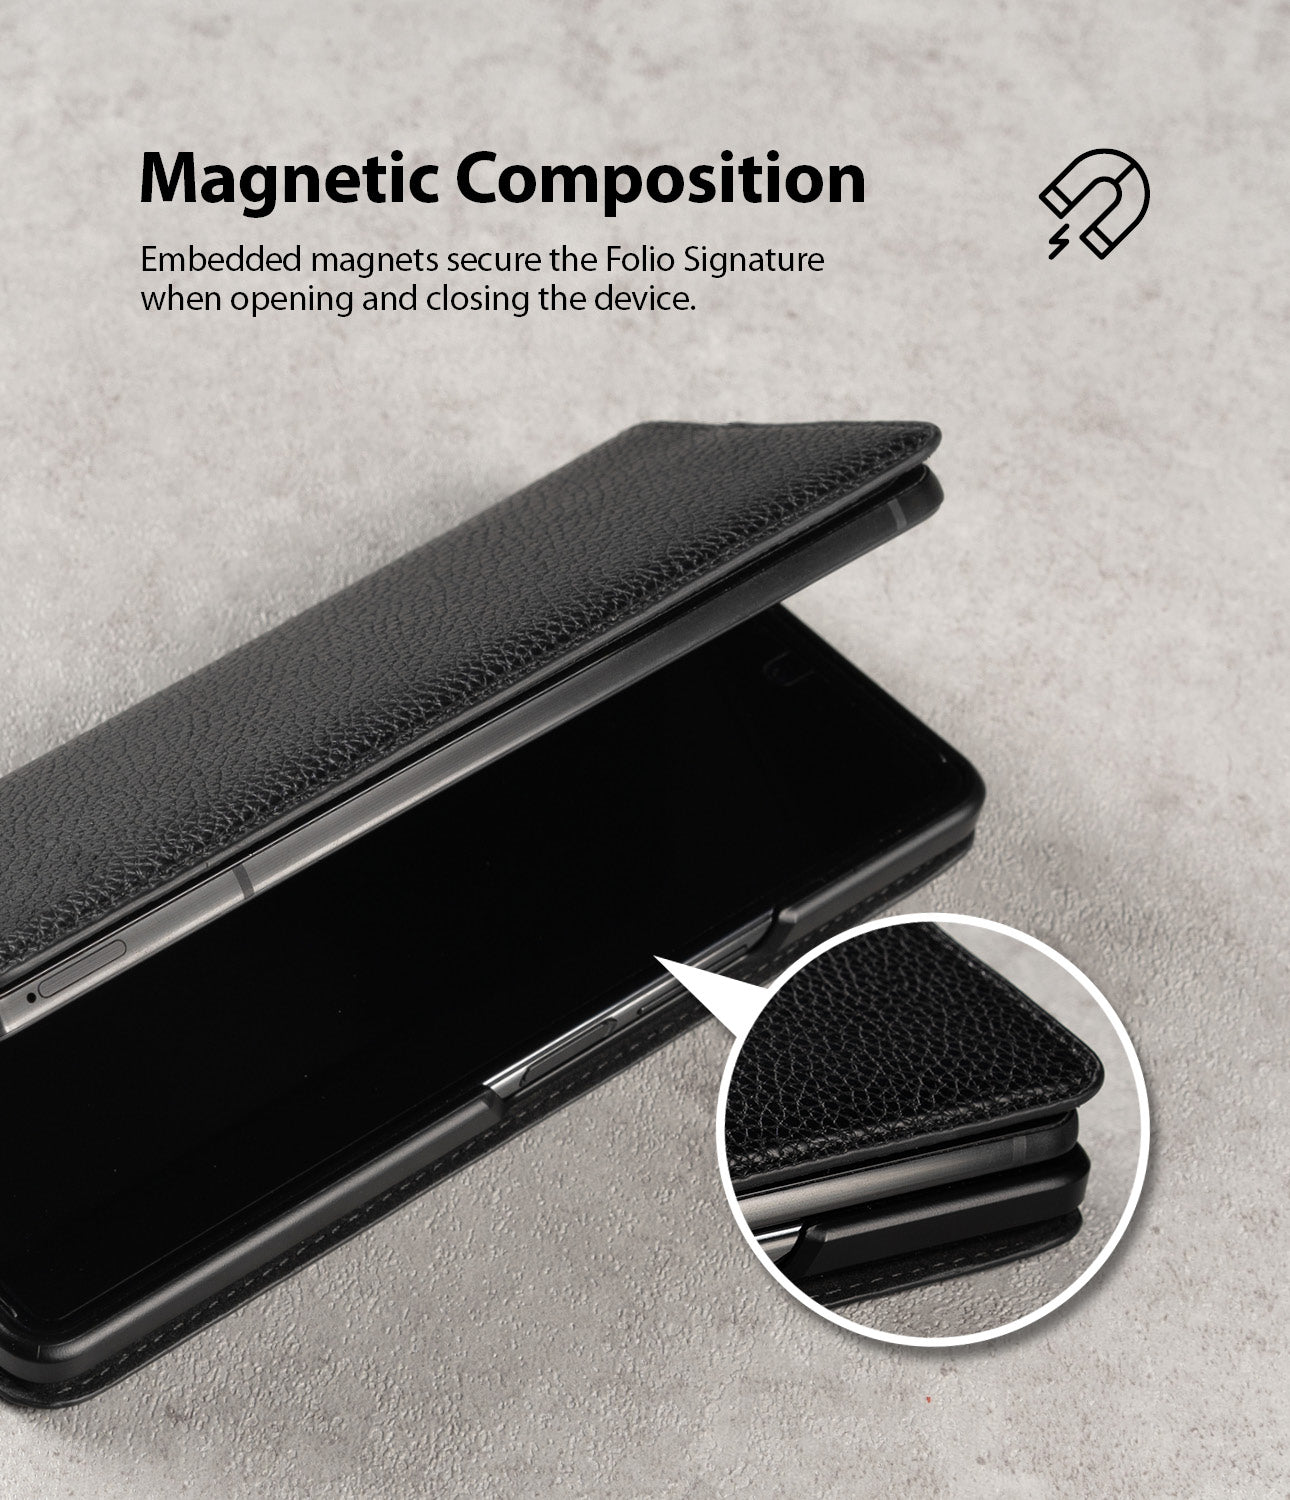 magnetic composition - embedded magnets secure the folio signature when opening and closing the device